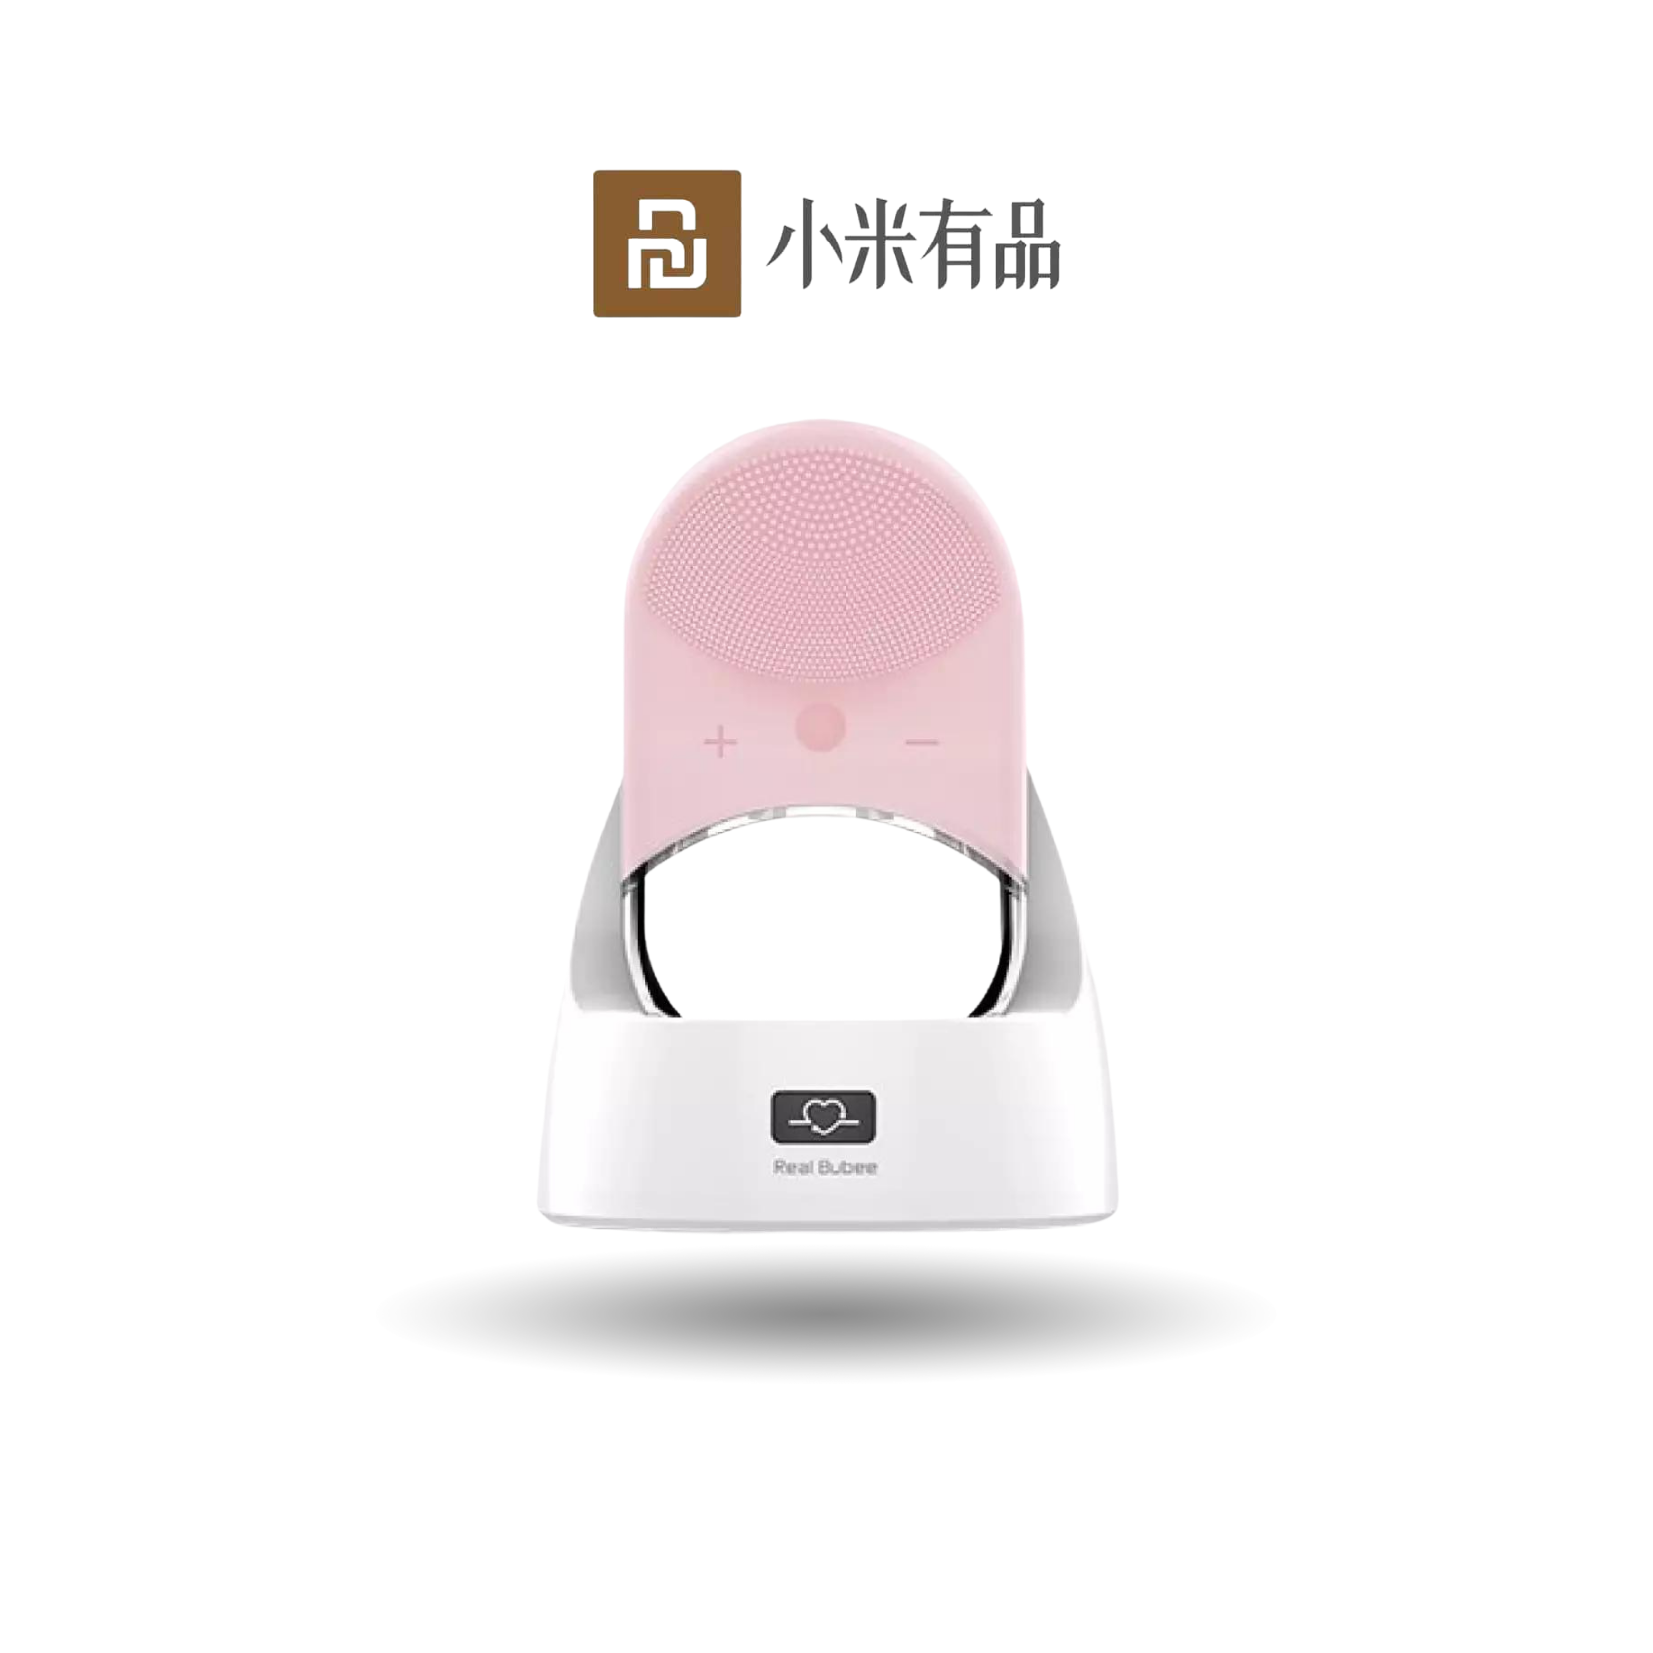 Real Bubee Wireless Ultrasonic Facial Cleanser